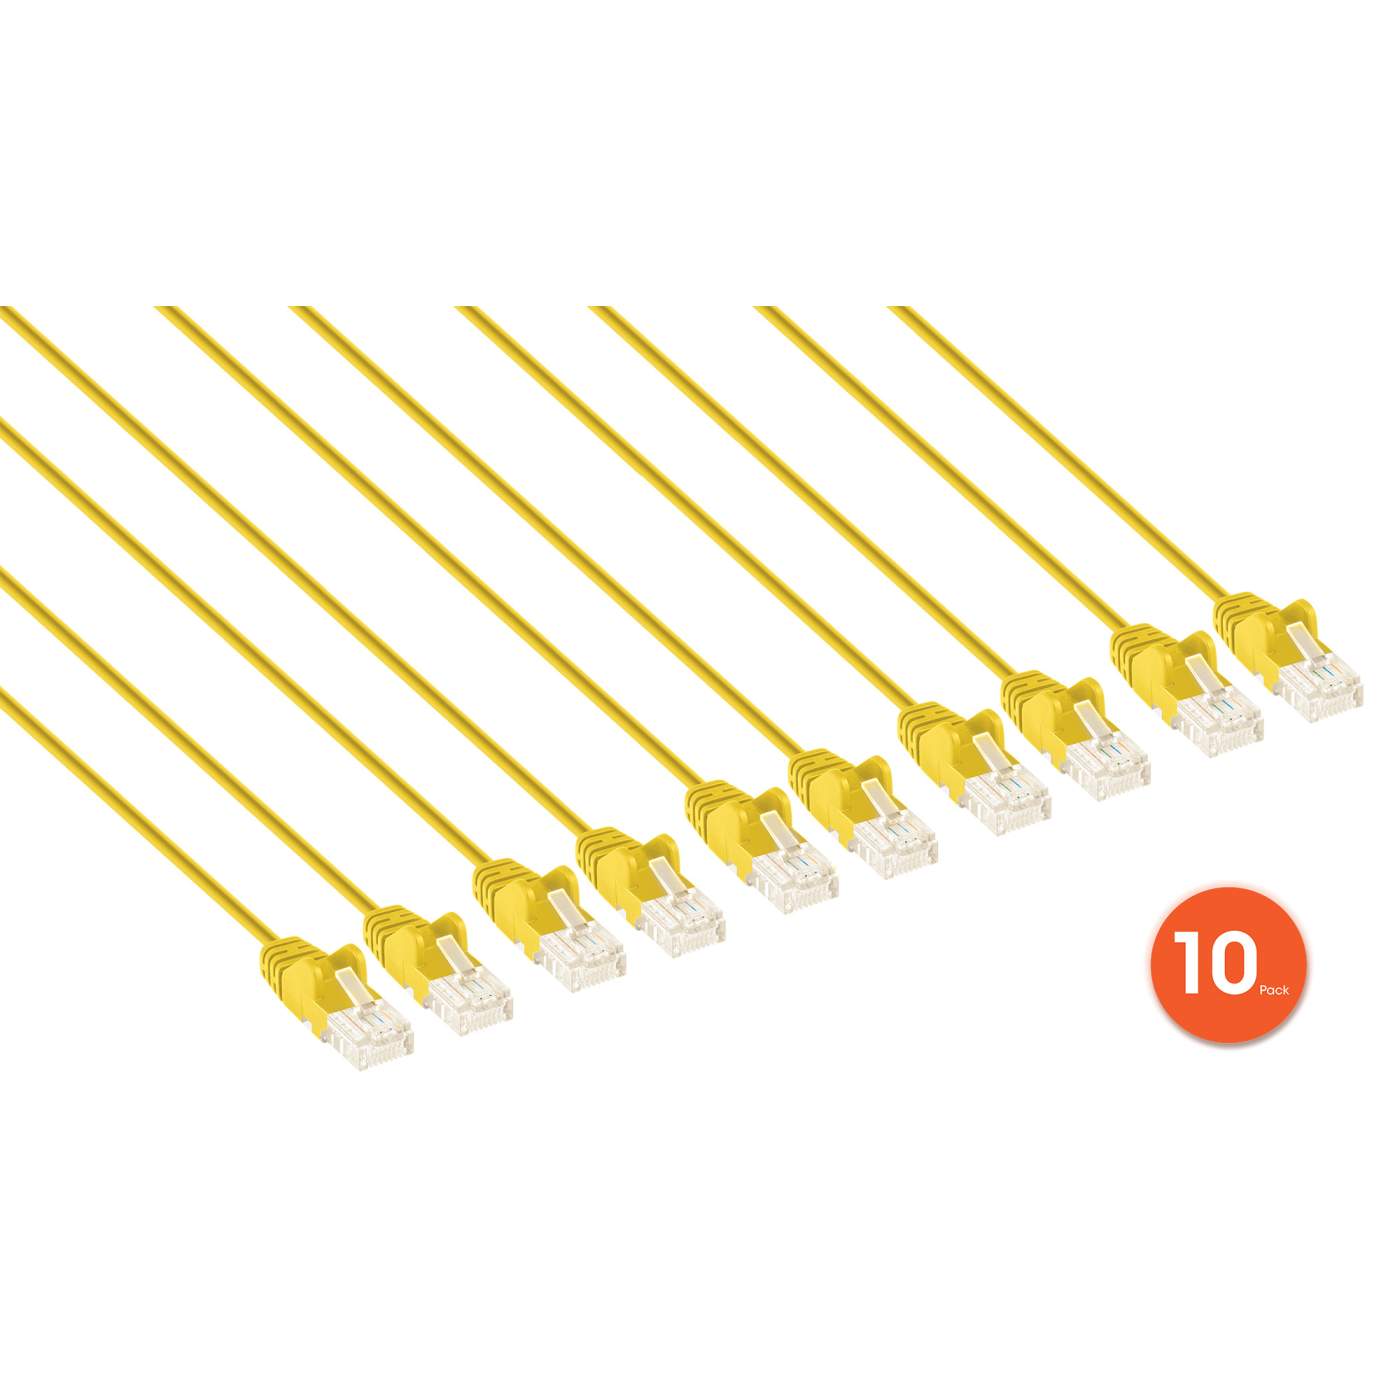 Cat6 U/UTP Slim Network Patch Cable, 3 ft., Yellow, 10-Pack Image 2